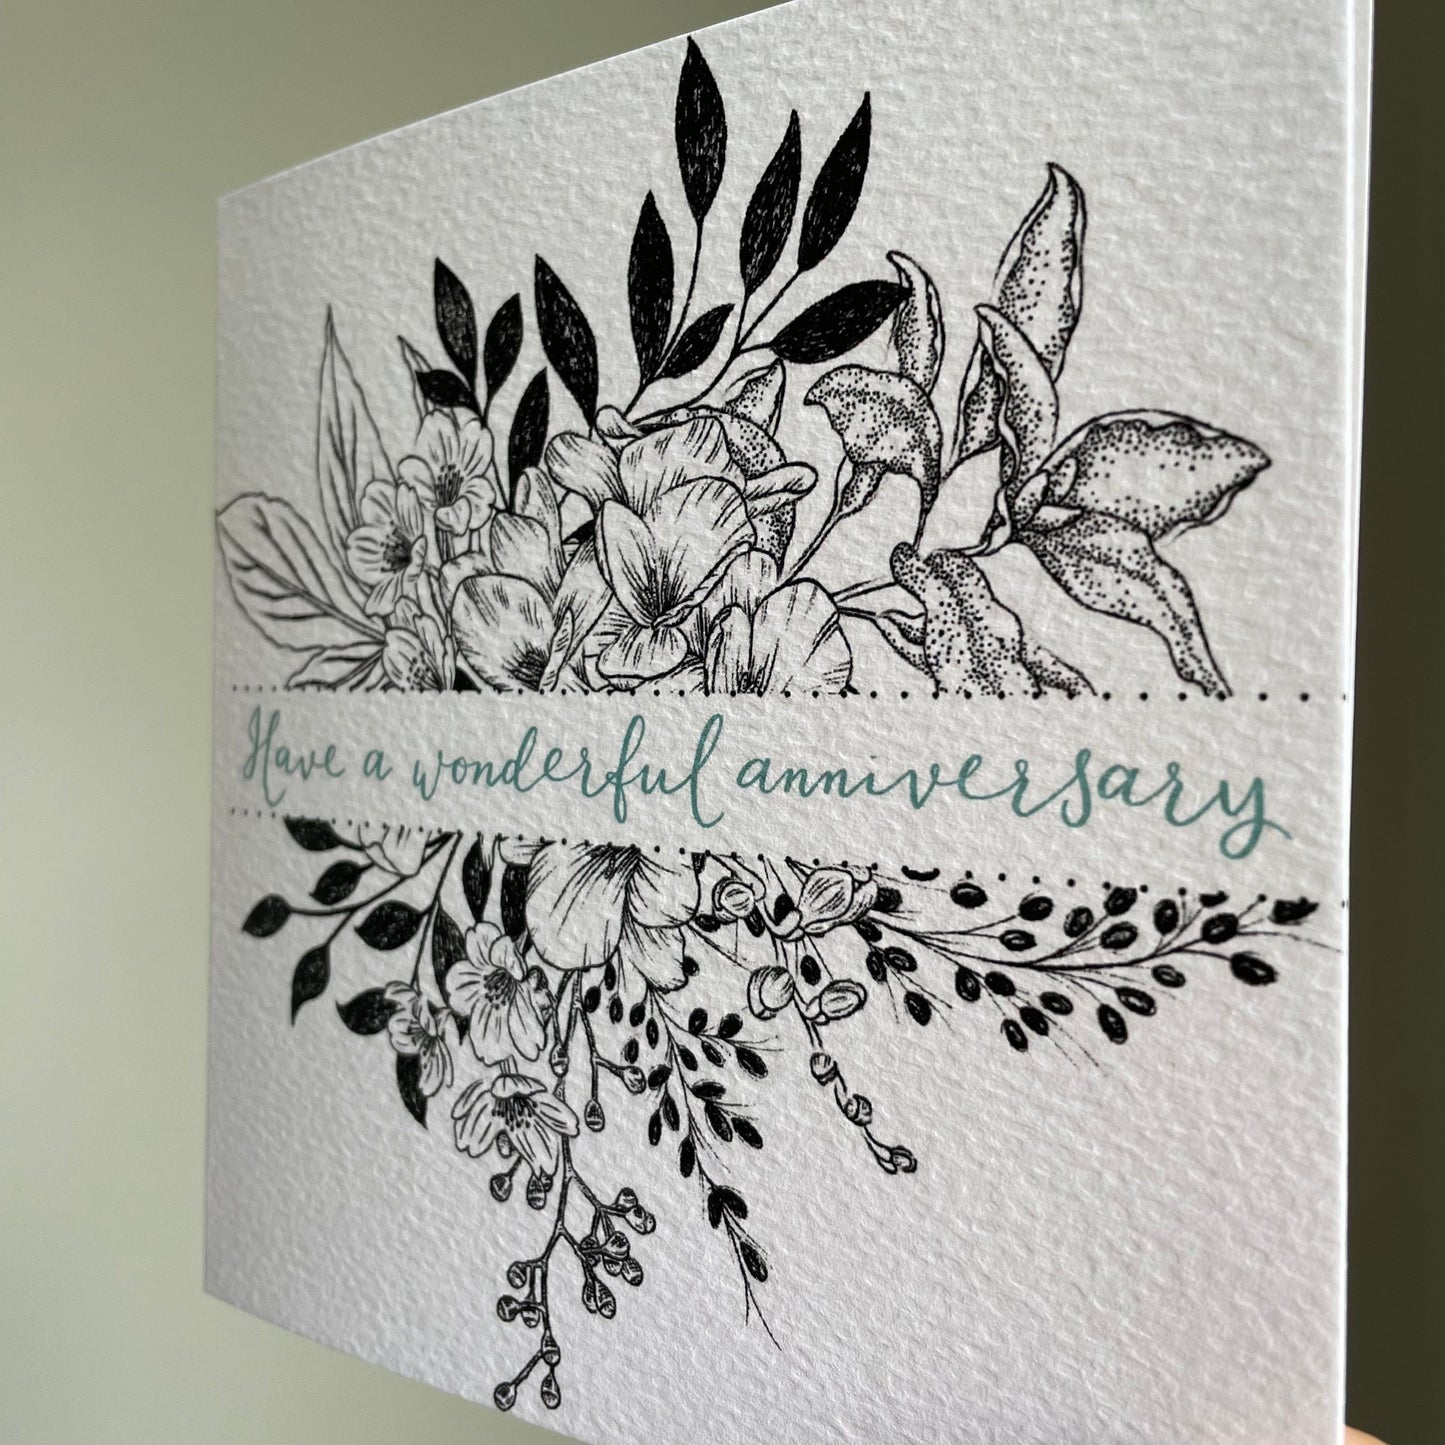 Have a wonderful anniversary elegant textured card Greeting & Note Cards And Hope Designs   